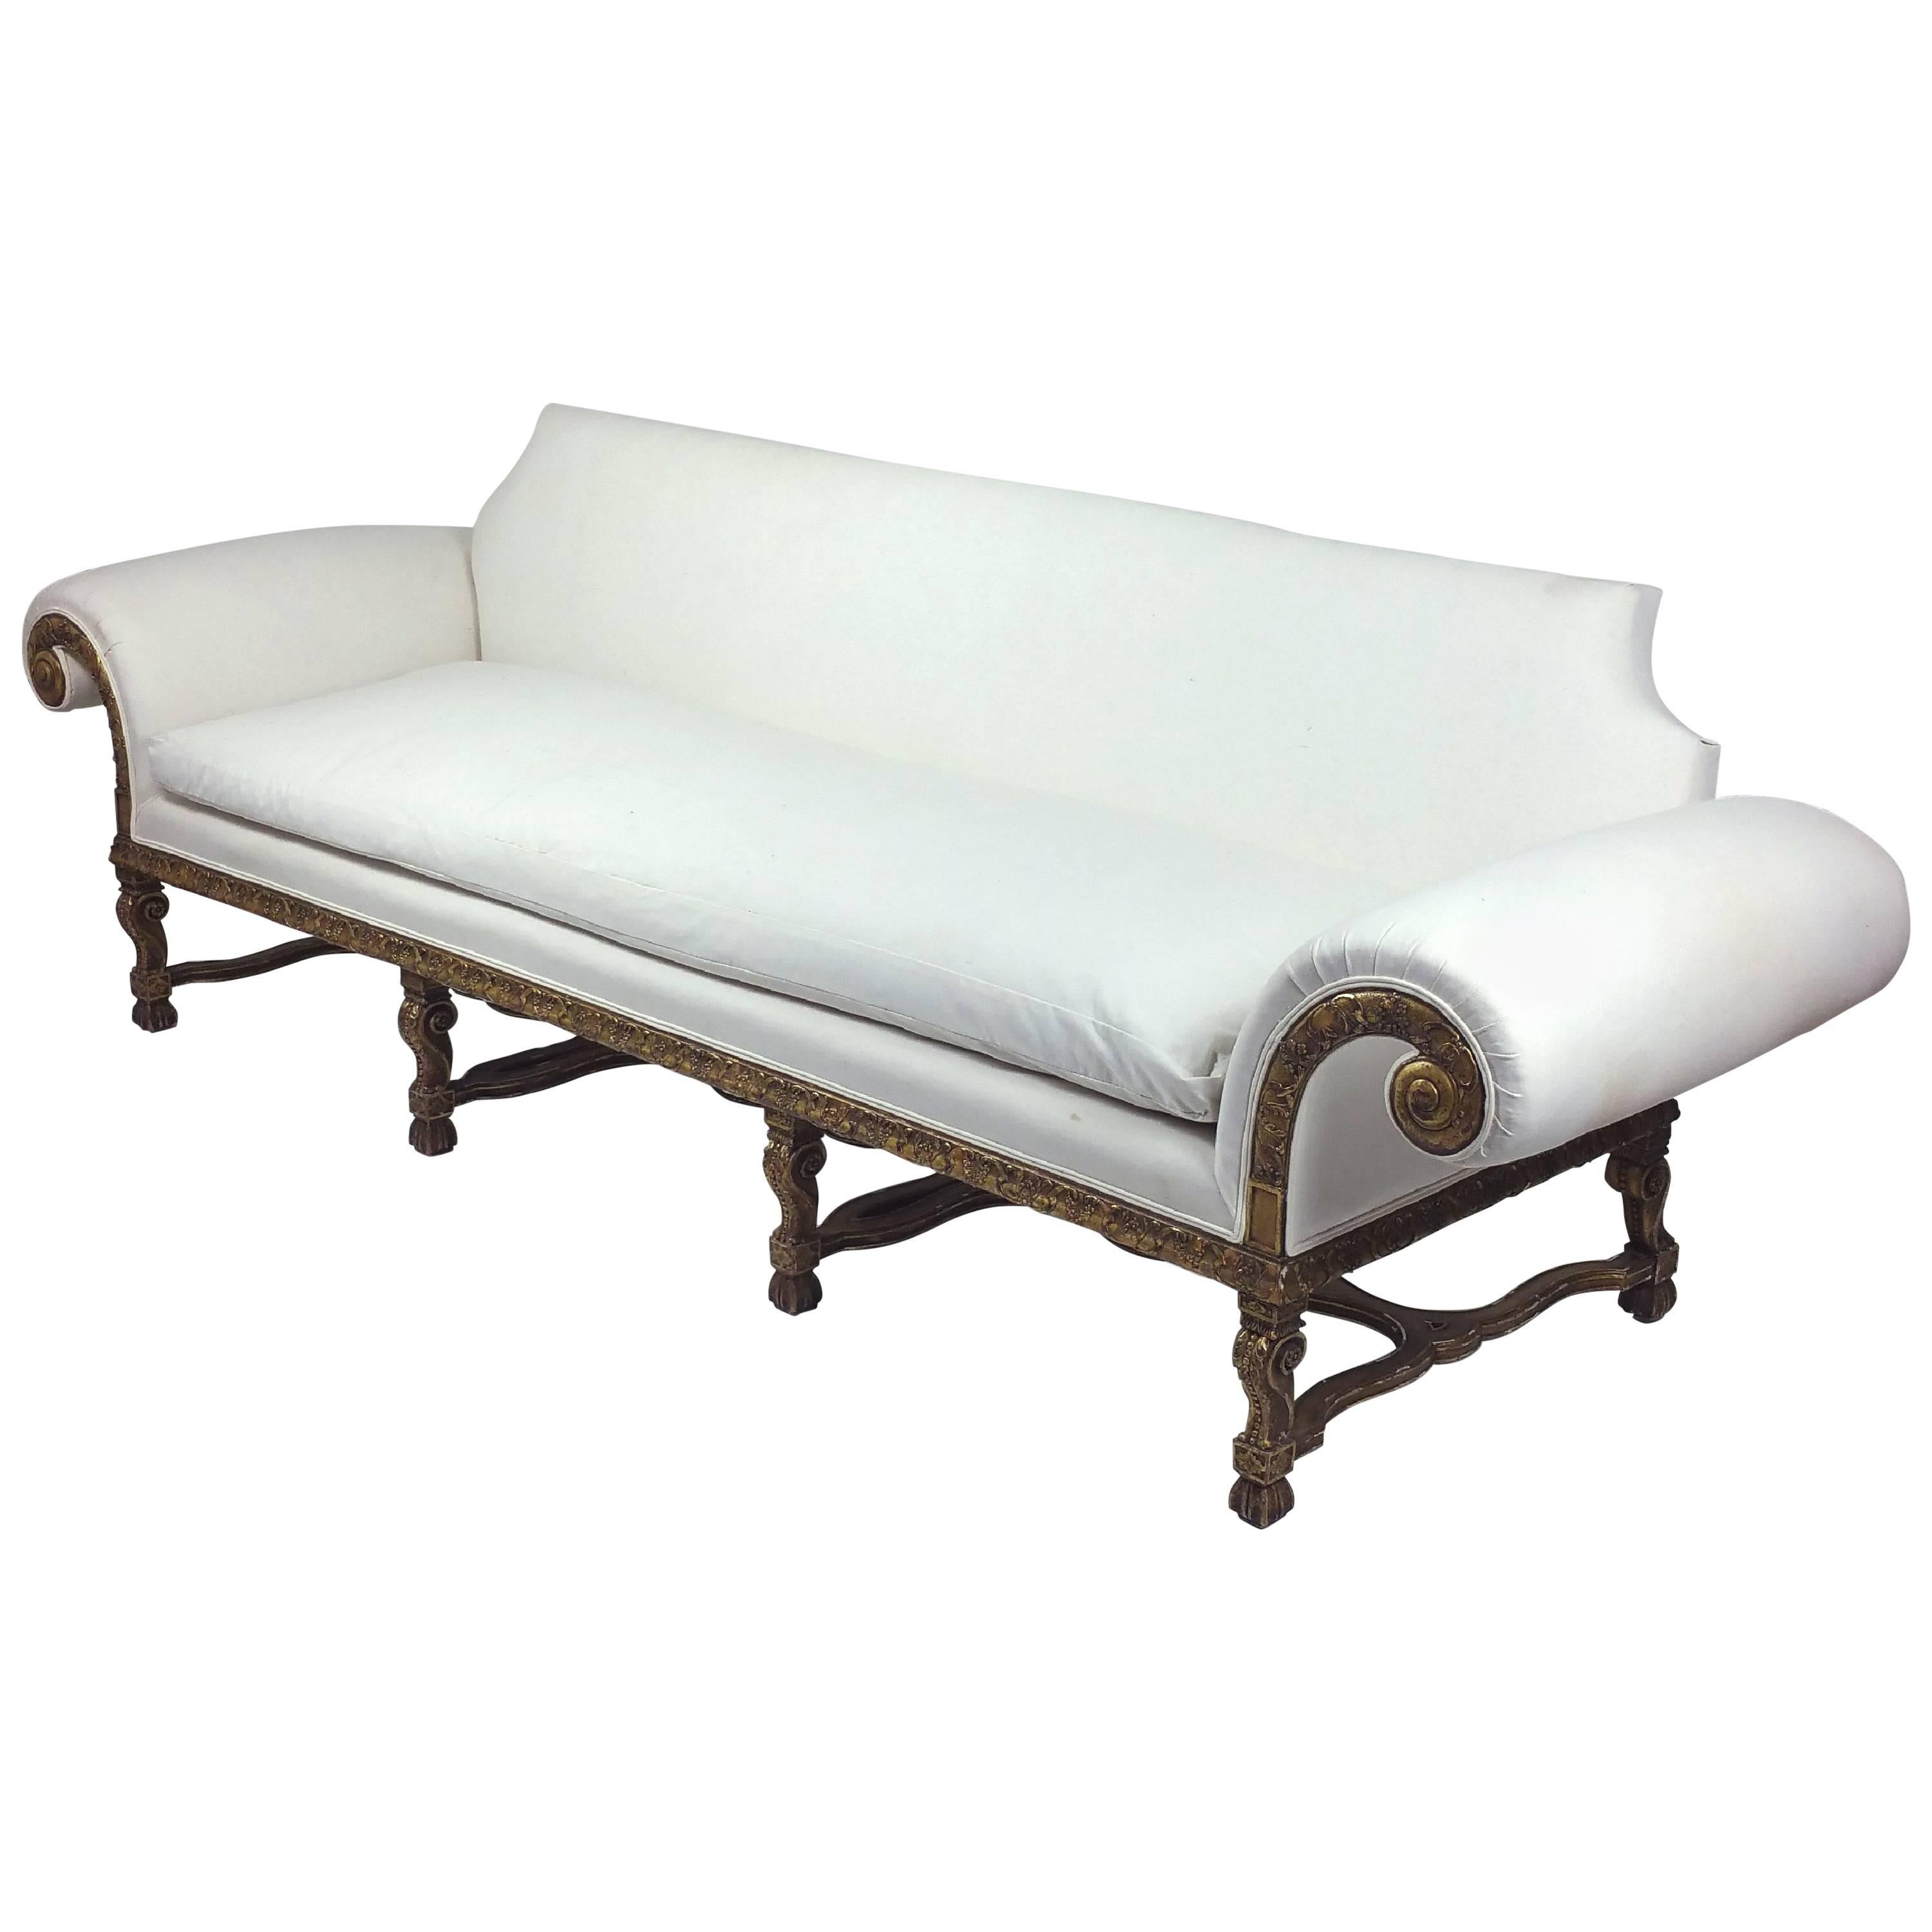 19th Century William and Mary Styled Carved Giltwood Settee